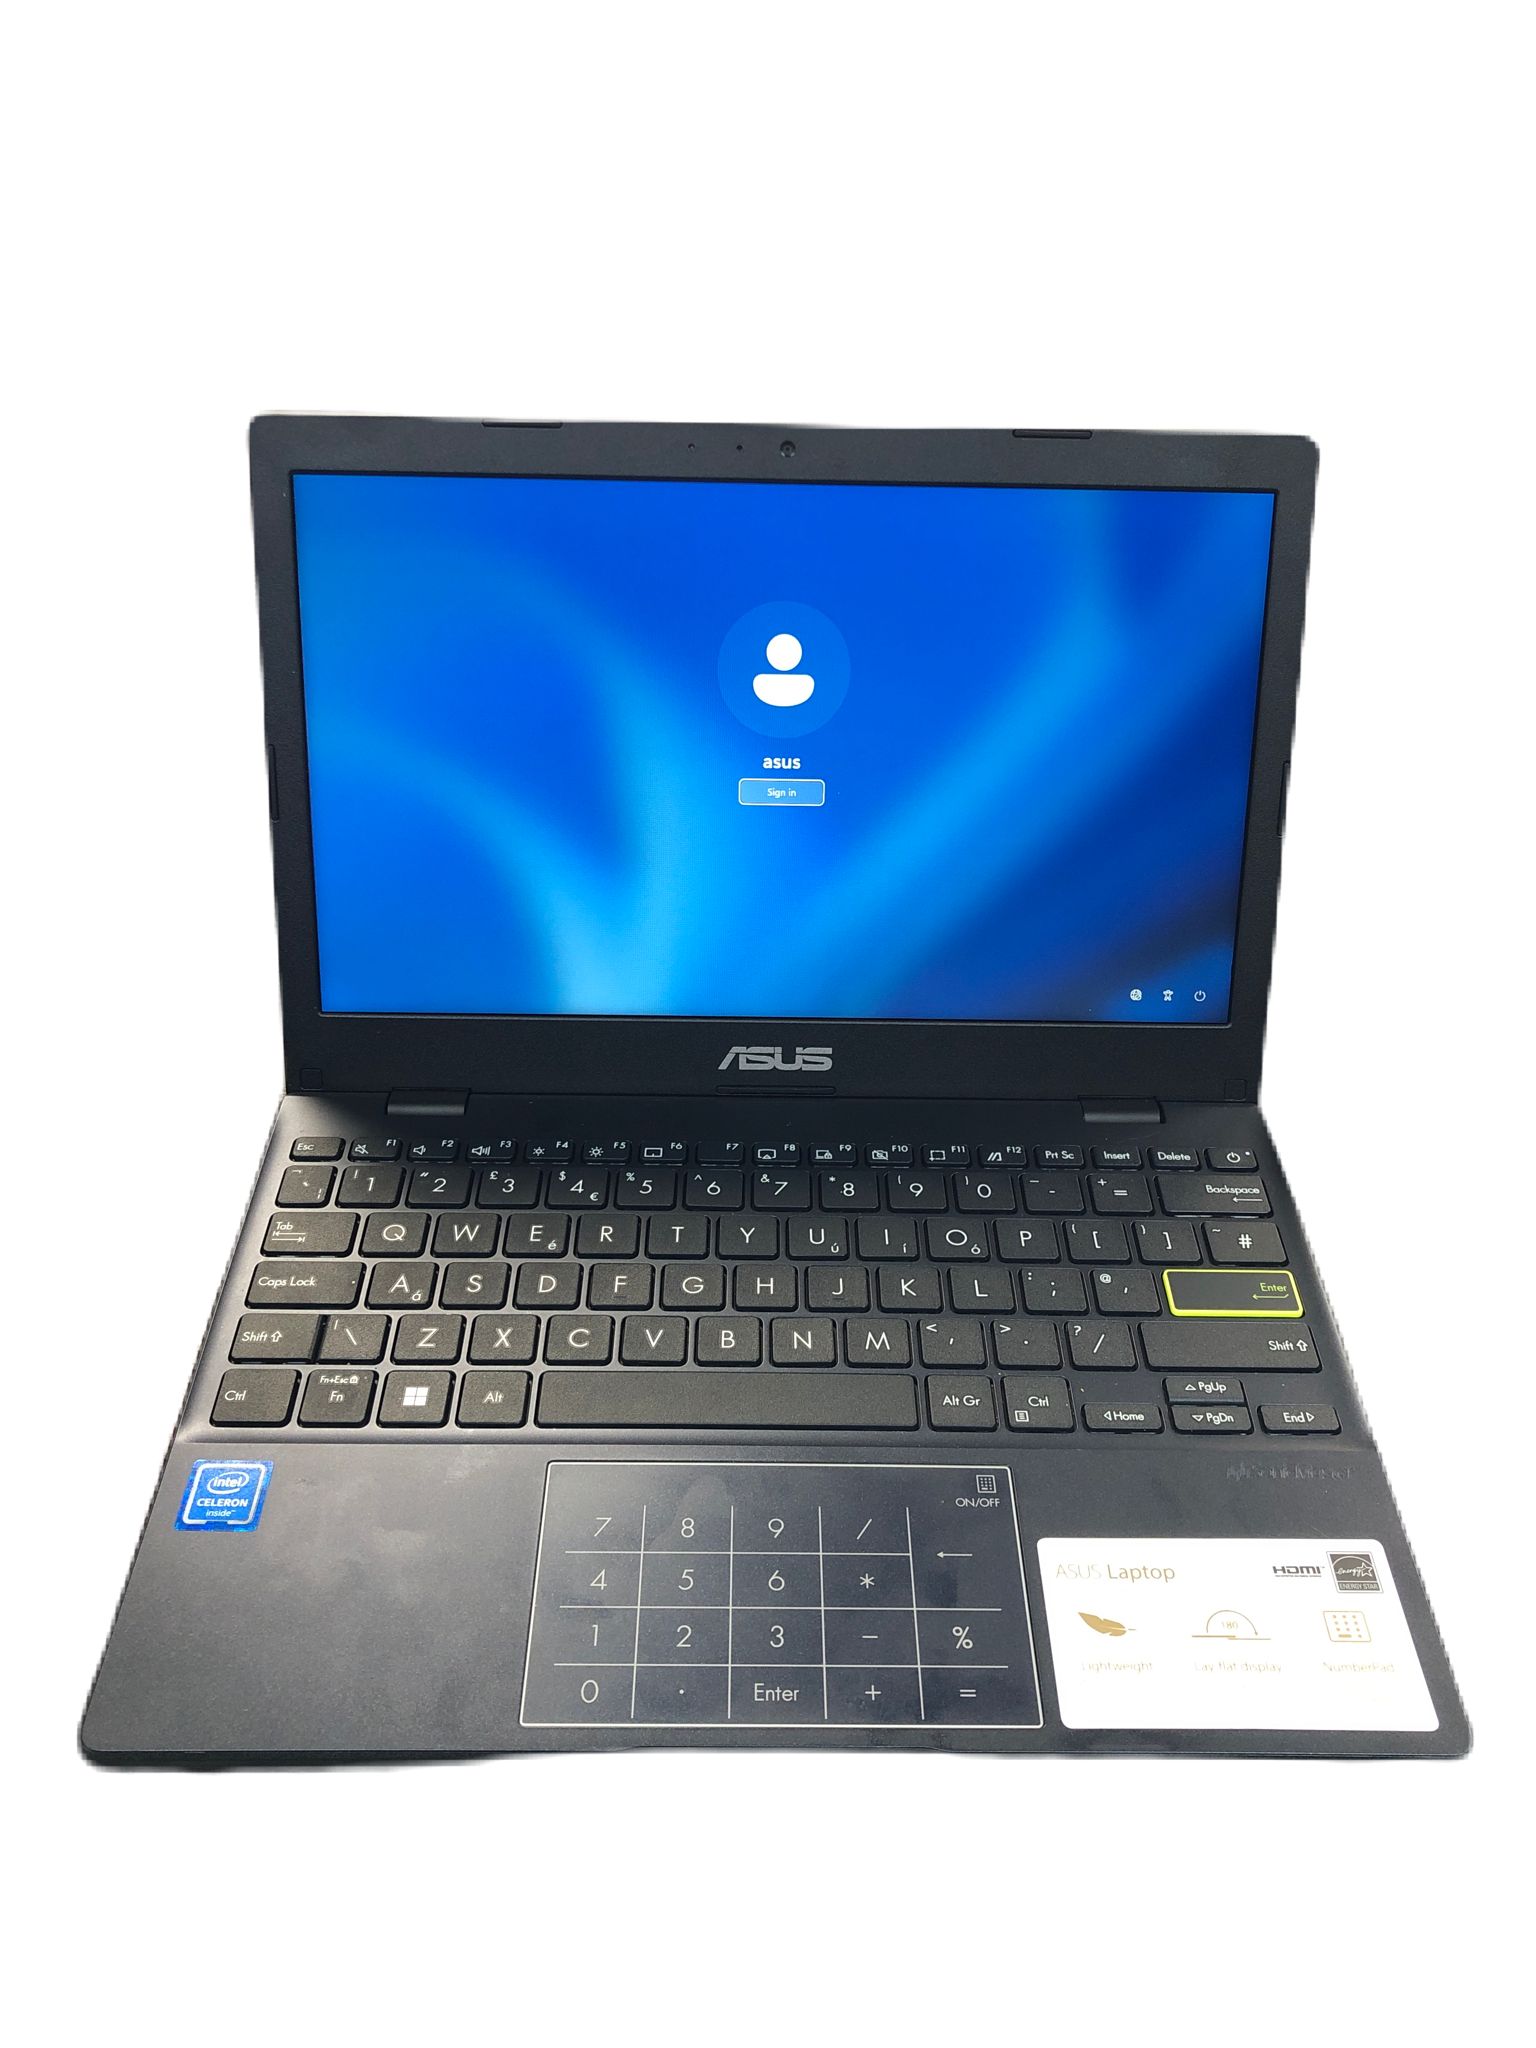 Asus Notebook PC, E210M